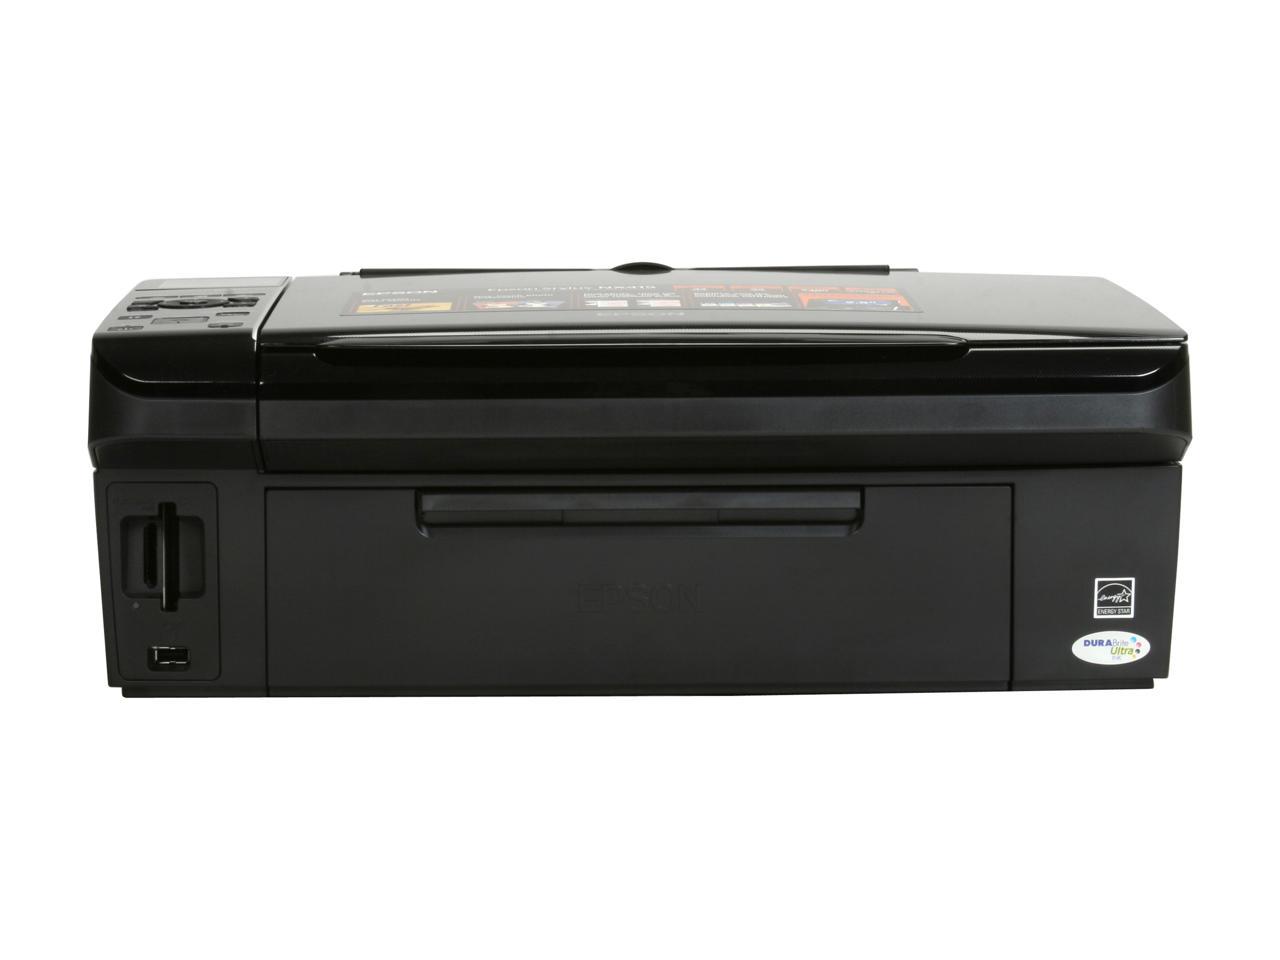 Epson Stylus Nx415 C11ca44231 Usb Inkjet Mfc All In One Color Printer 0446